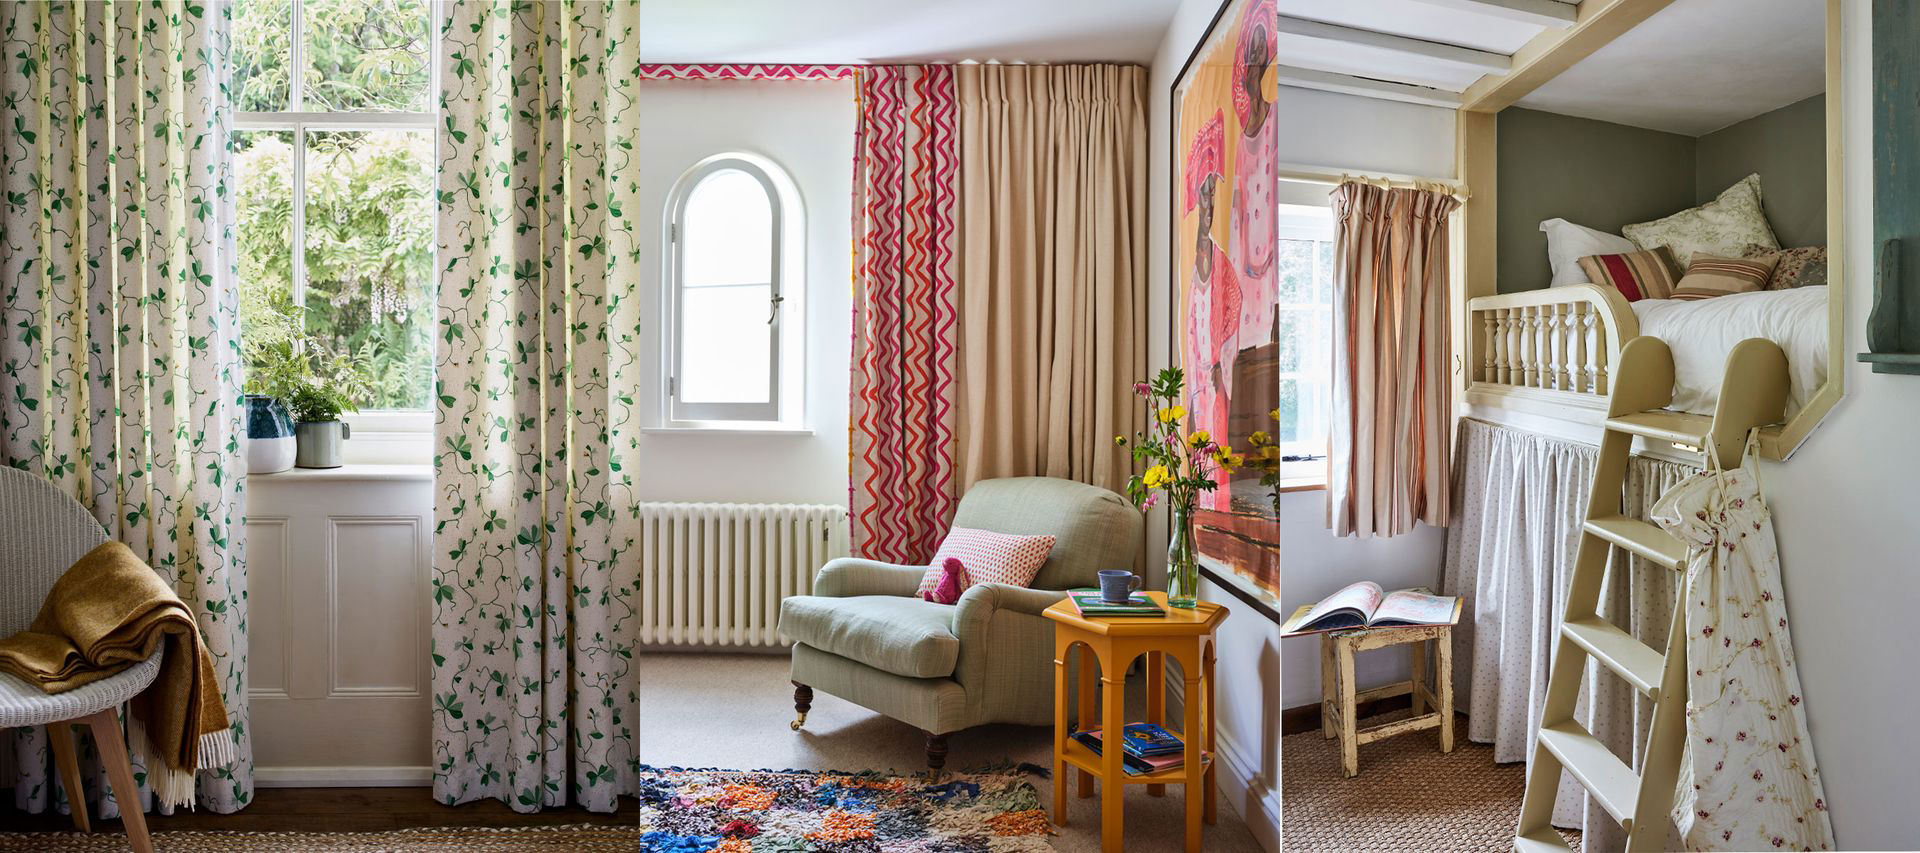 Curtain ideas – 30 styles and tips for every room in the home